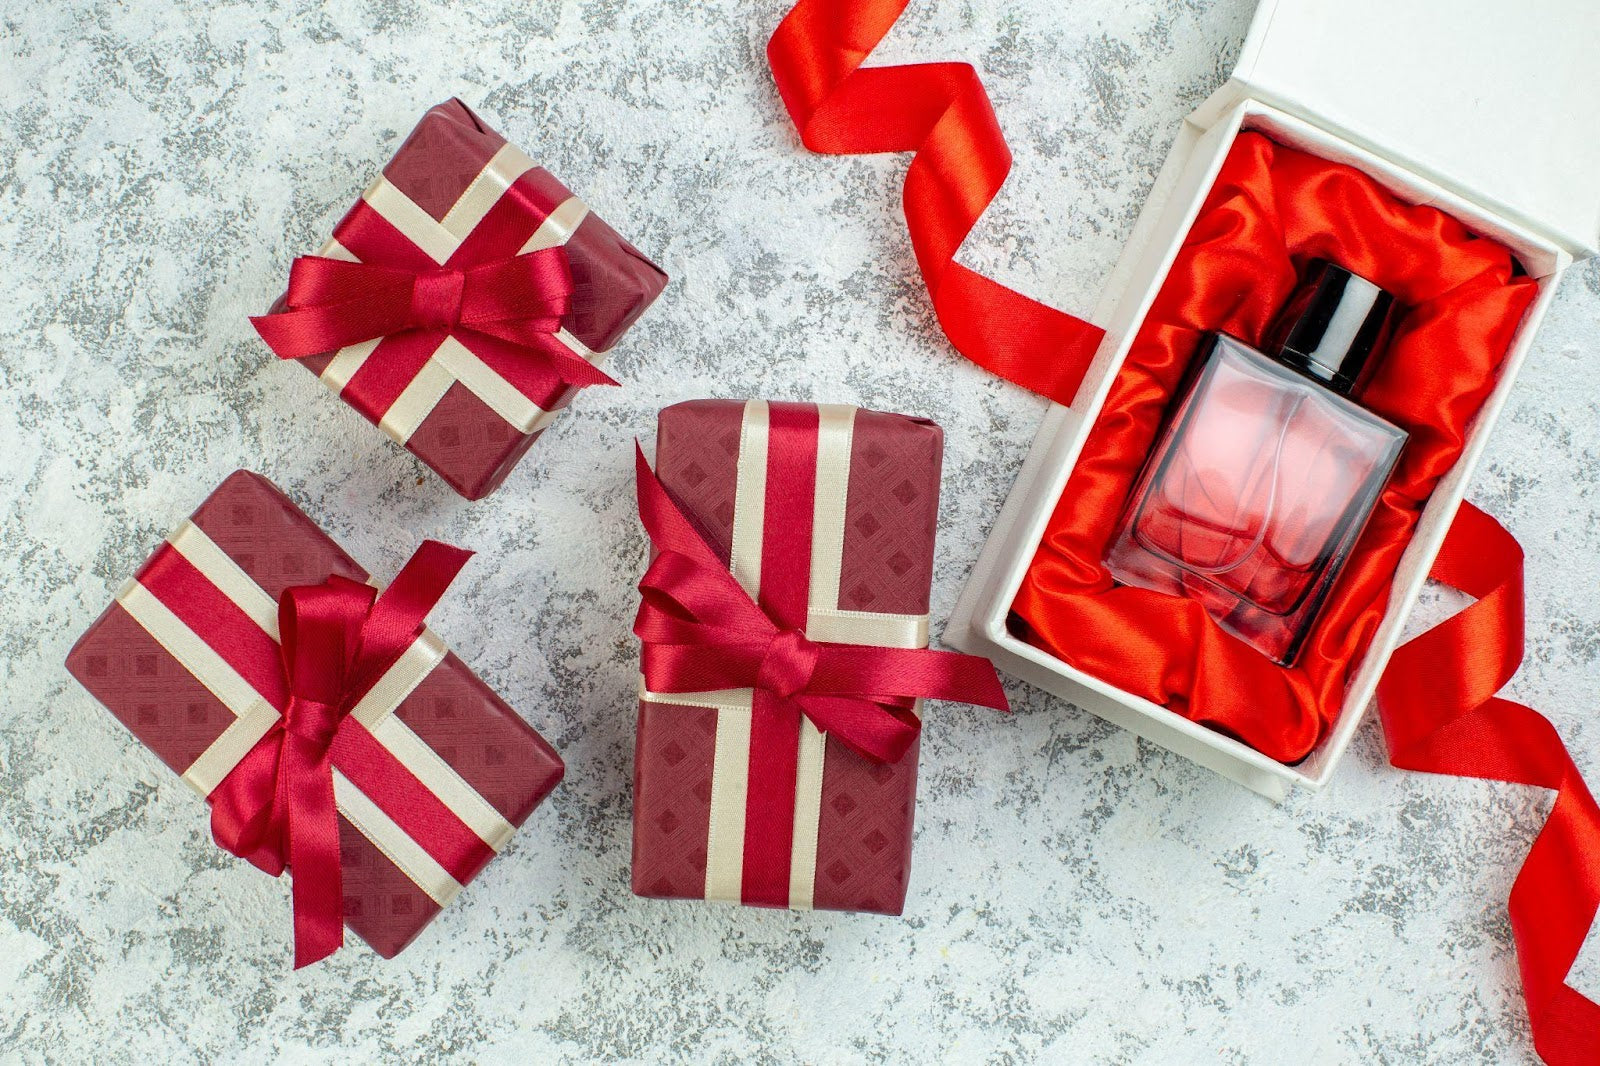 10 Fragrance Gifts We're Wishing For This Holiday Season